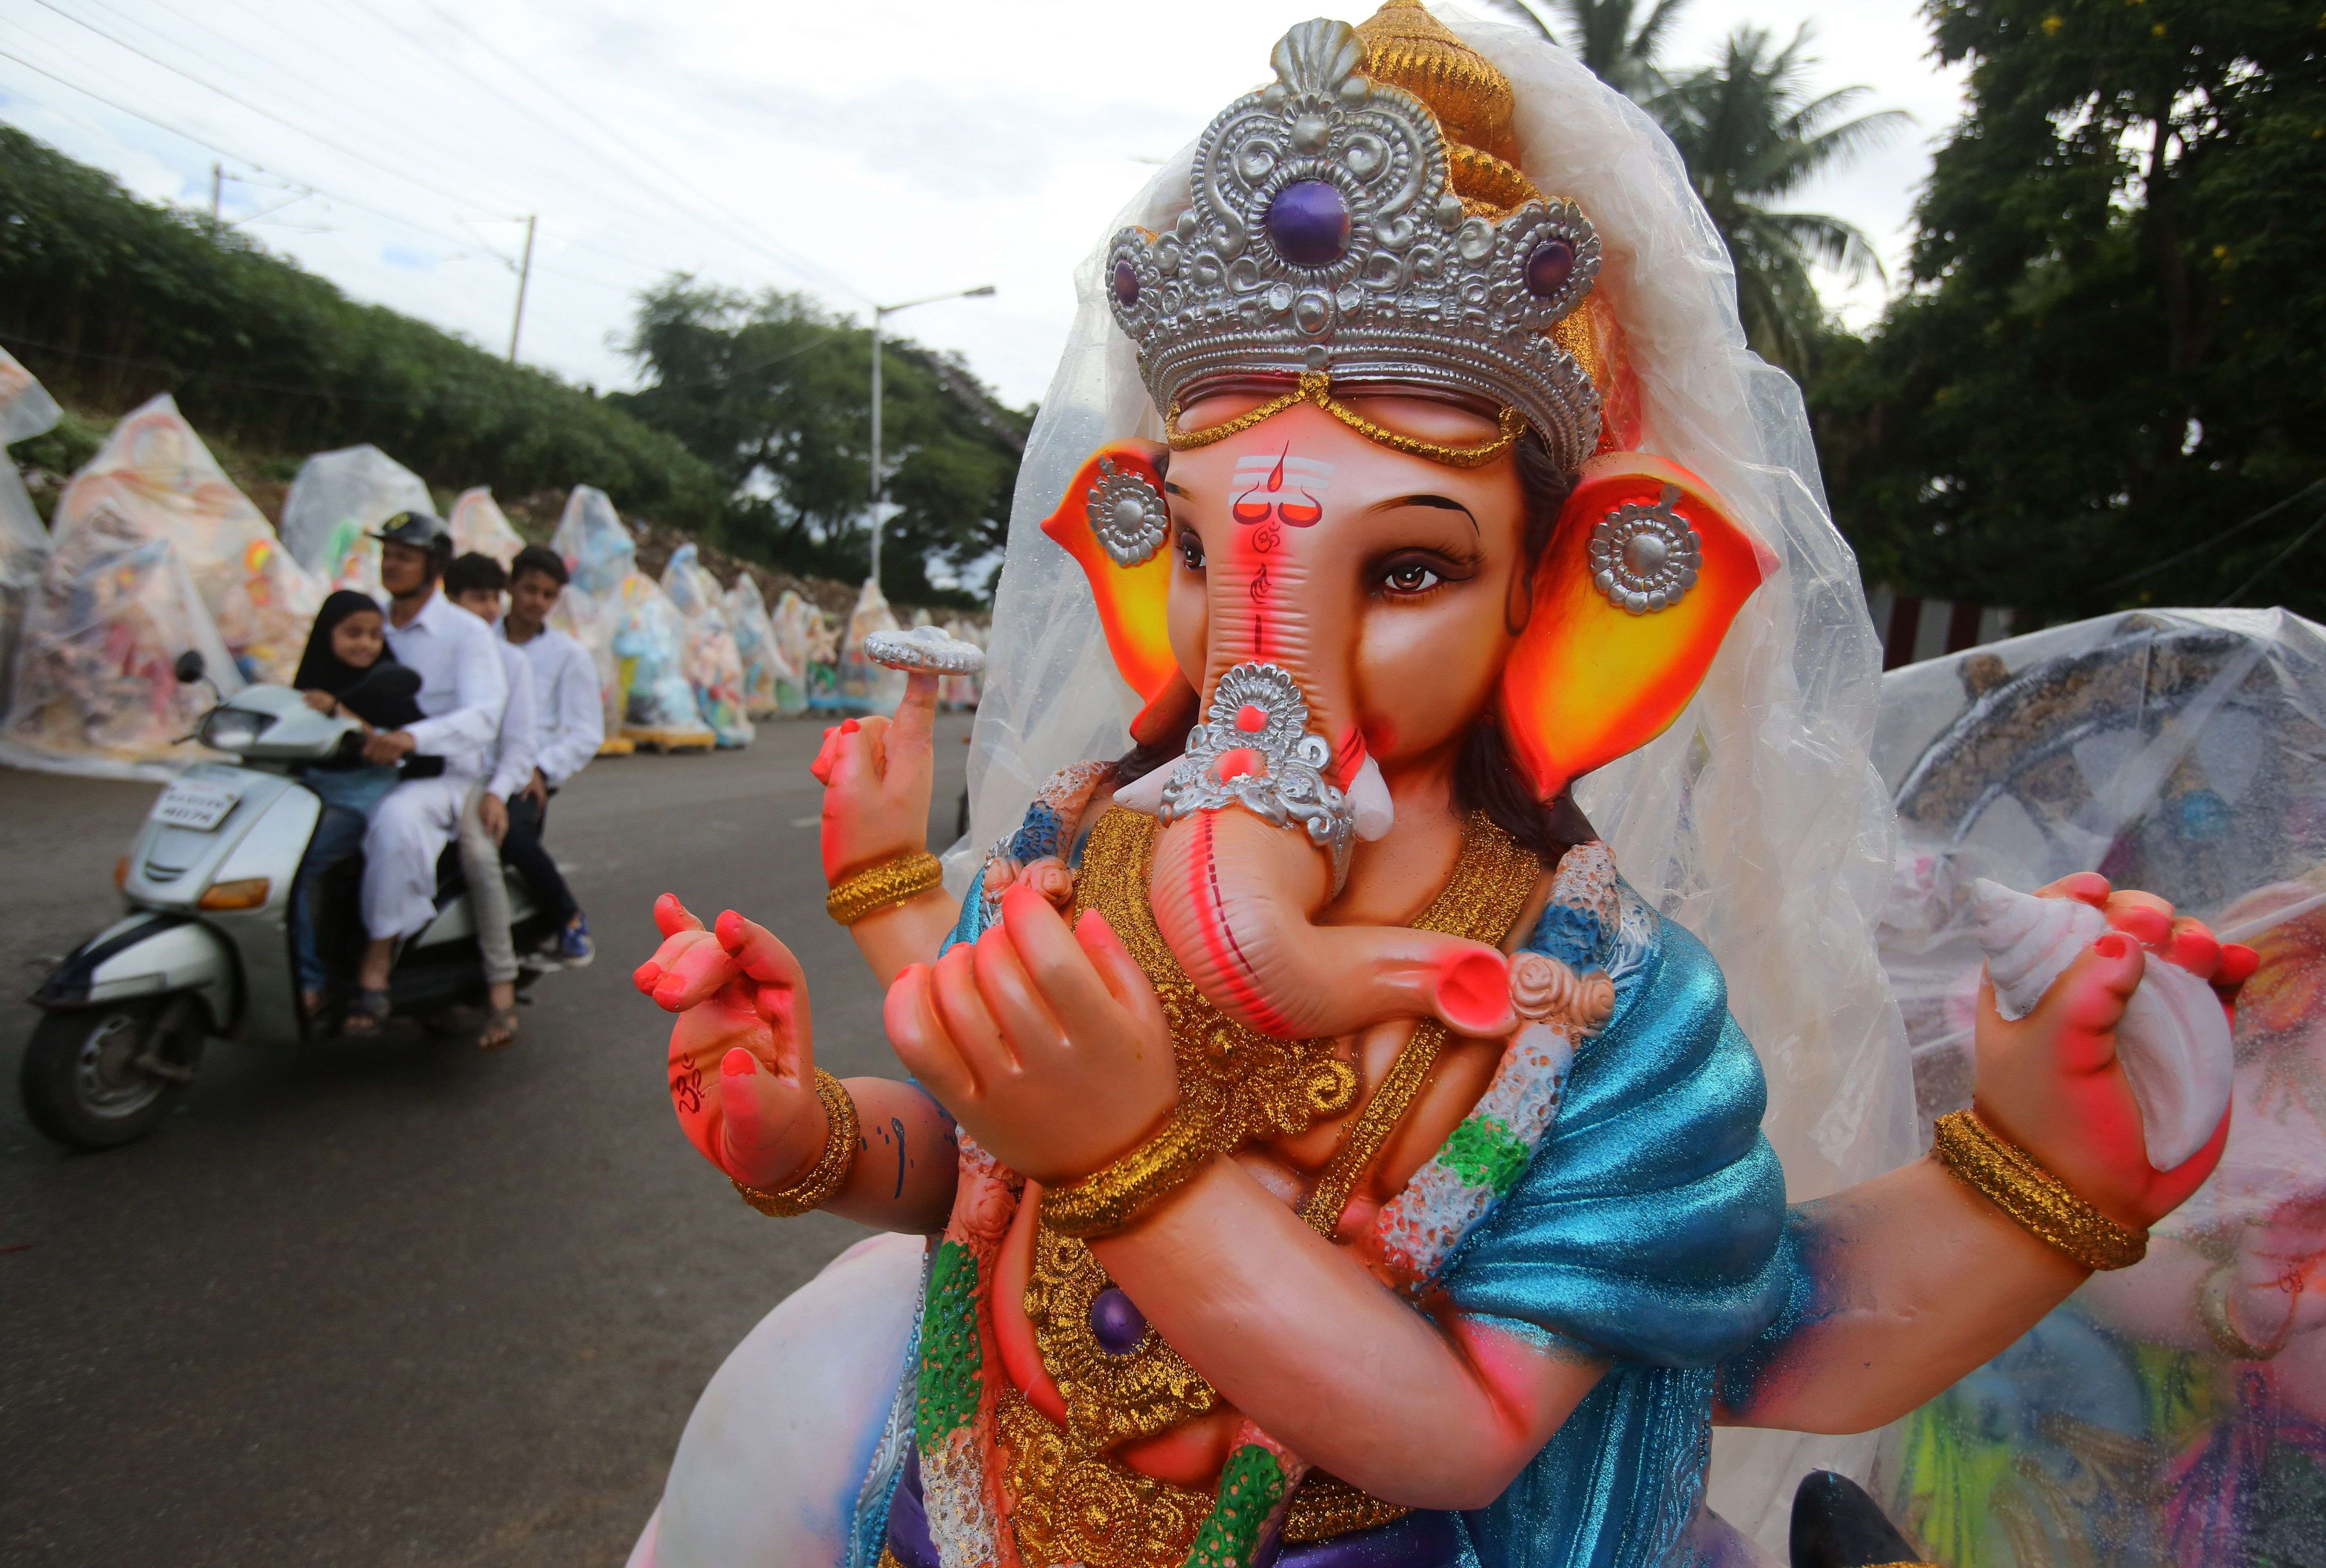 An Indian Muslim family rides past an idol of elephant-headed Hindu god Ganesha, put up on display to be sold ahead of Ganesh Chaturthi festival in Bangalore, India, Friday, Sept. 2, 2016. After worshipping the idols in their homes or specially set up worship venues, devotees immerse them in water bodies at the end of the festival. (AP Photo/Aijaz Rahi)